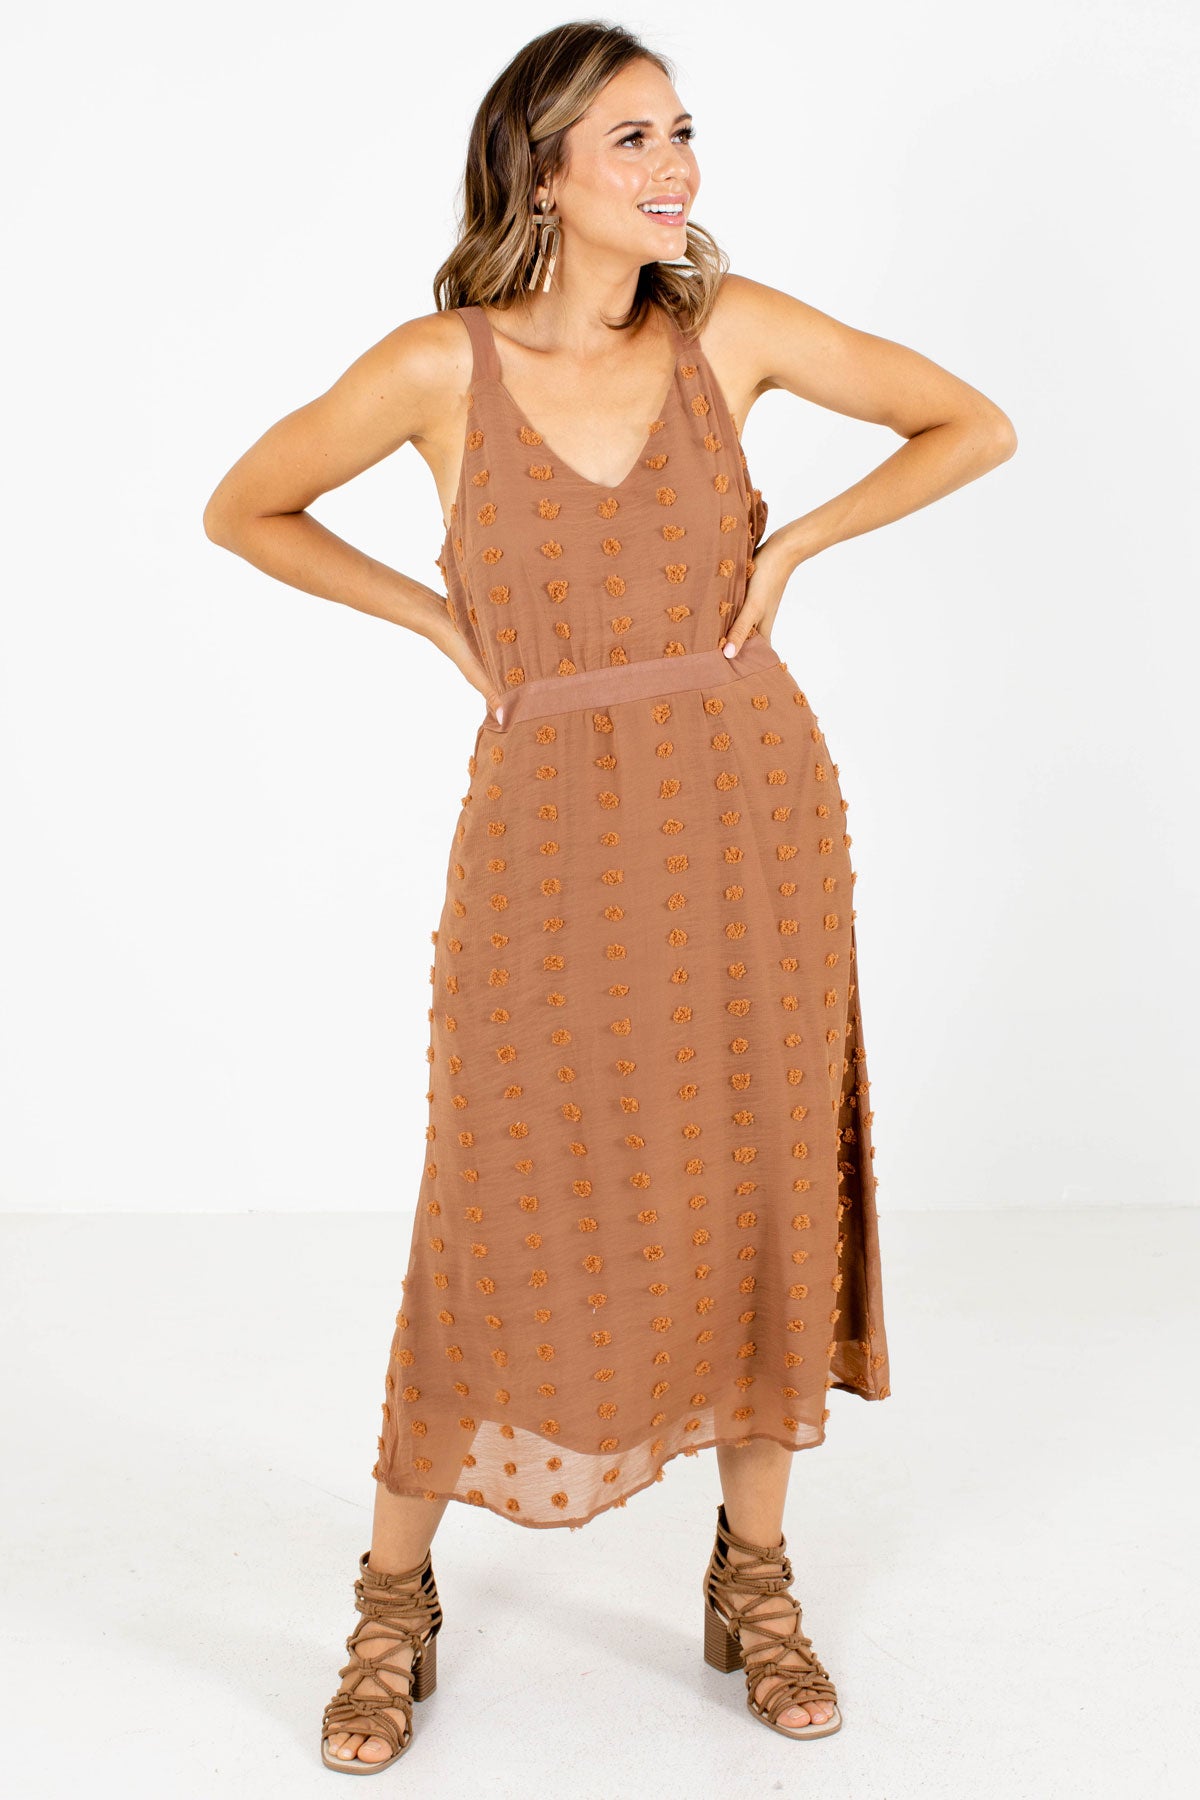 Brown Swiss Dot Material Boutique Midi Dresses for Women